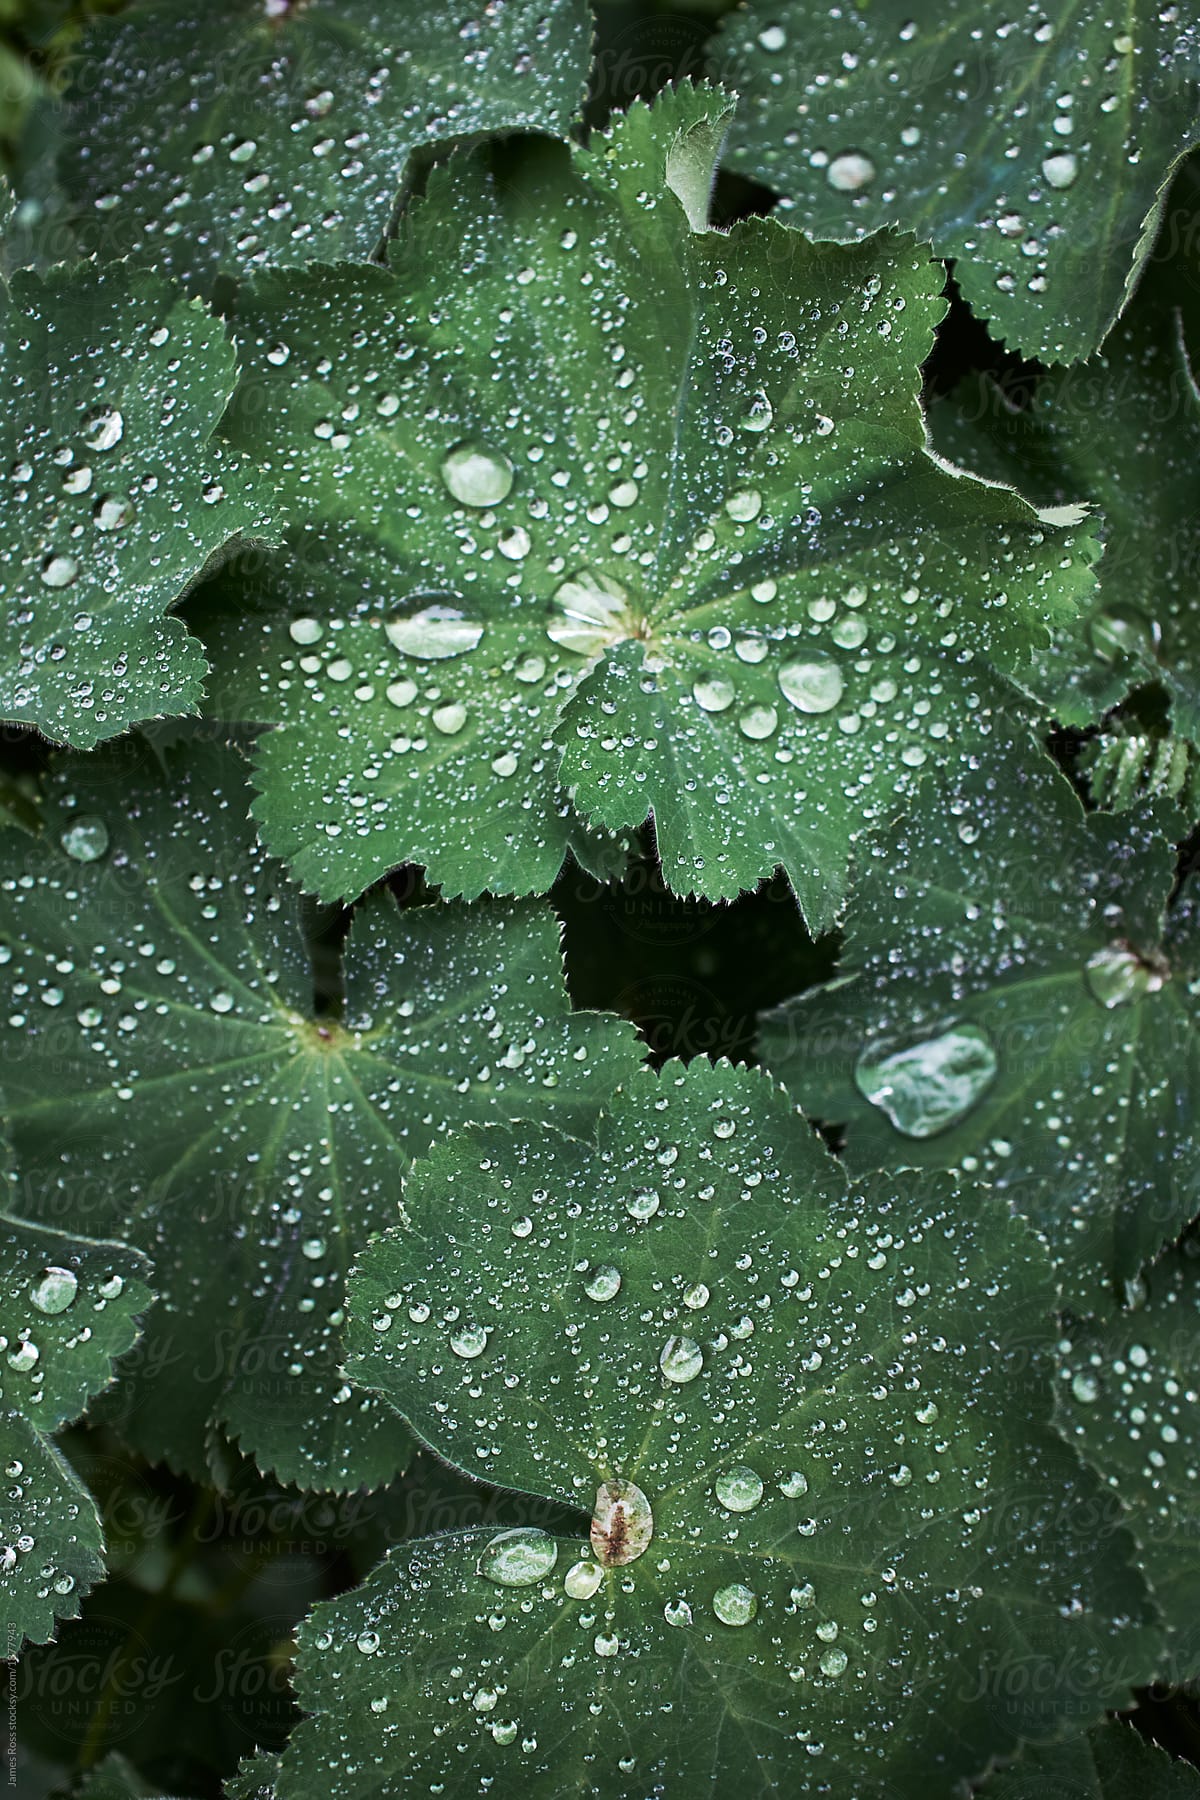 Water droplets on the leaves of a plant